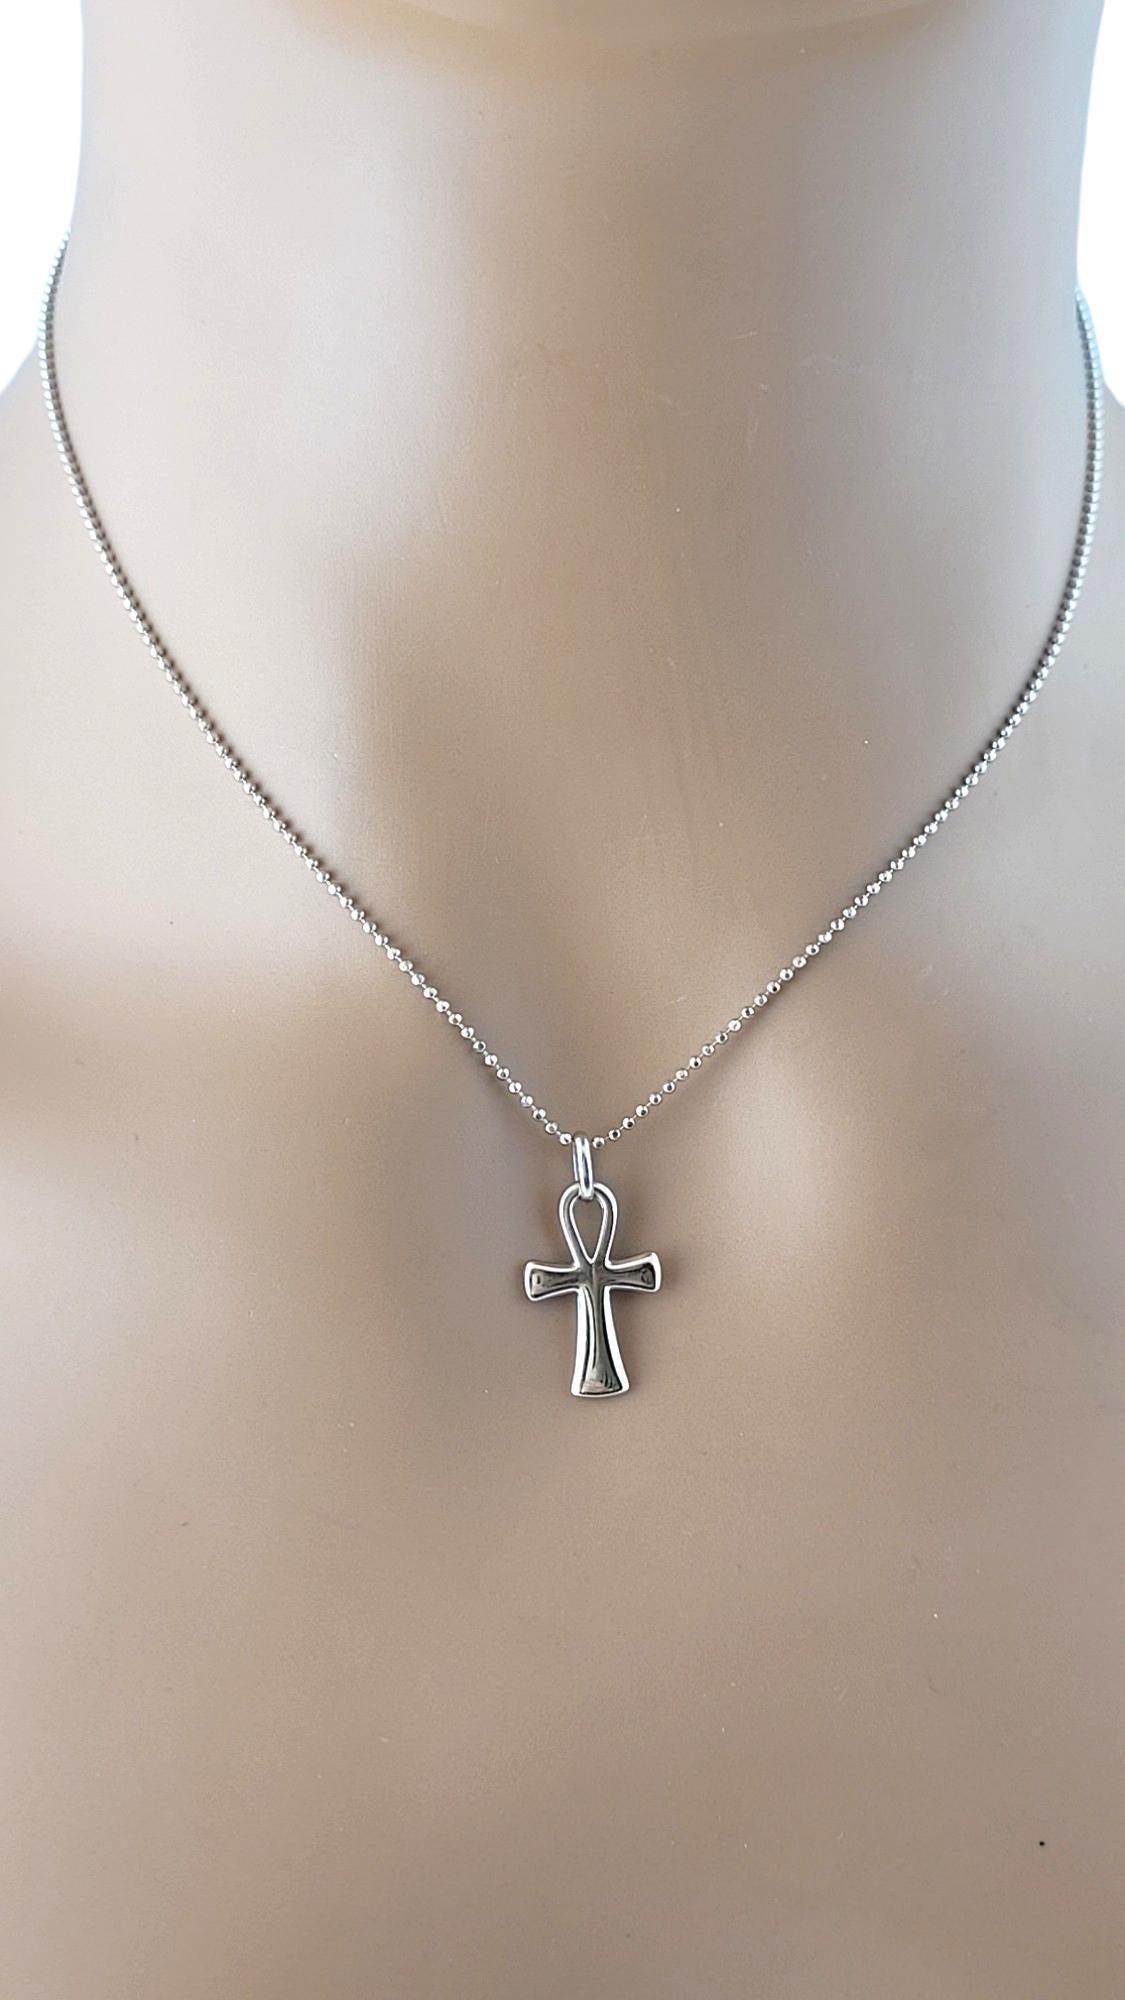 18K White Gold Cross Pendant Necklace #16445 For Sale 2